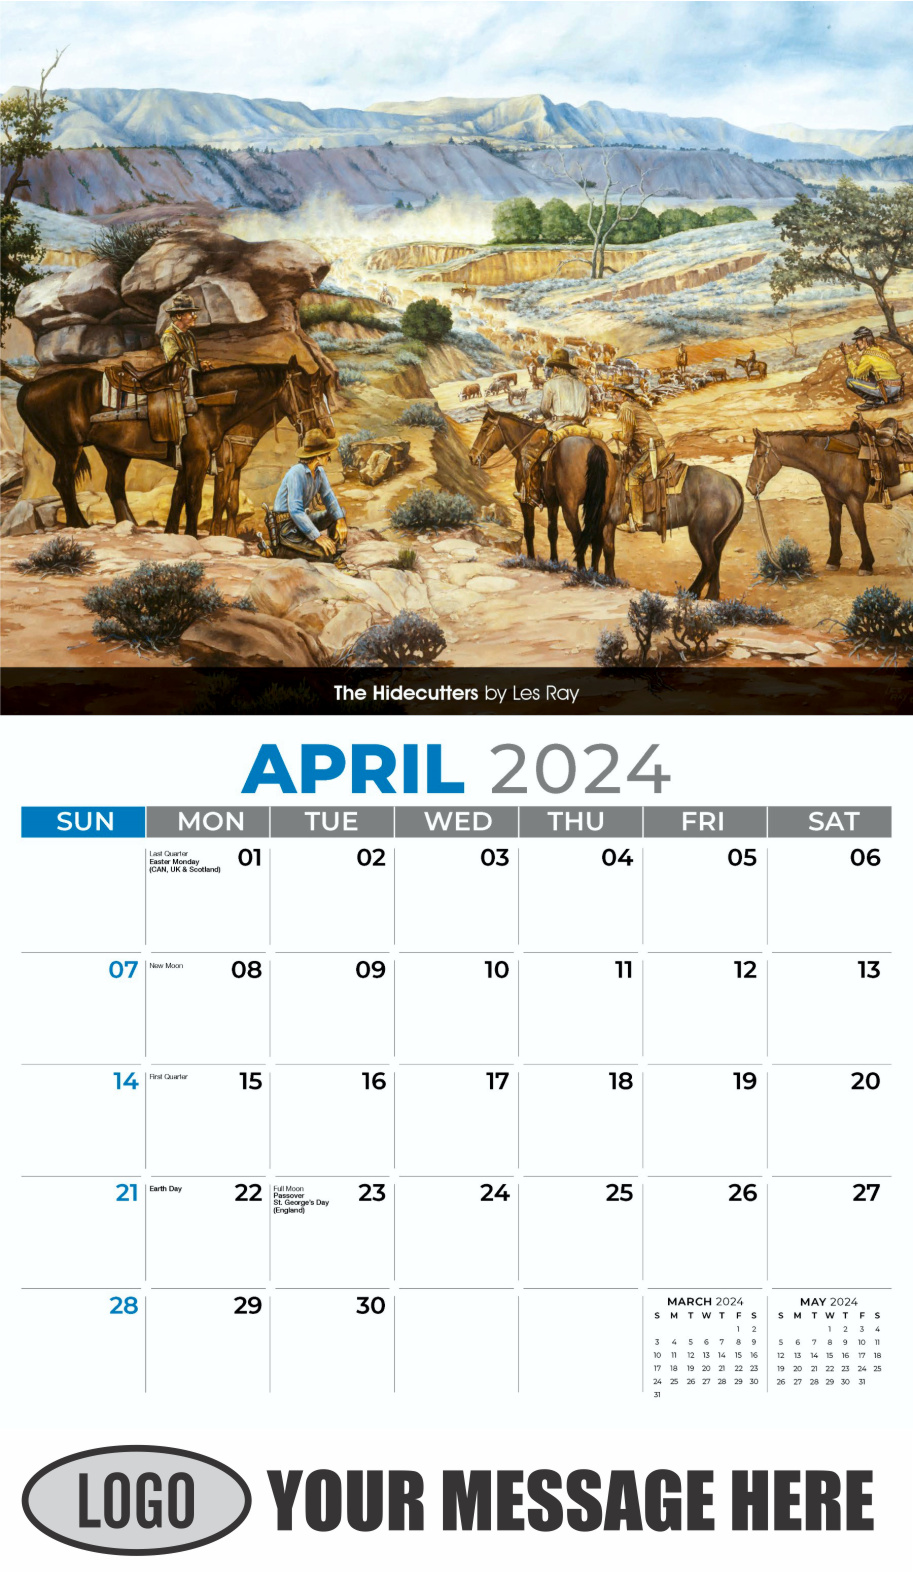 Spirit of the Old West 2024 Old West Art Business Promo Wall Calendar - April